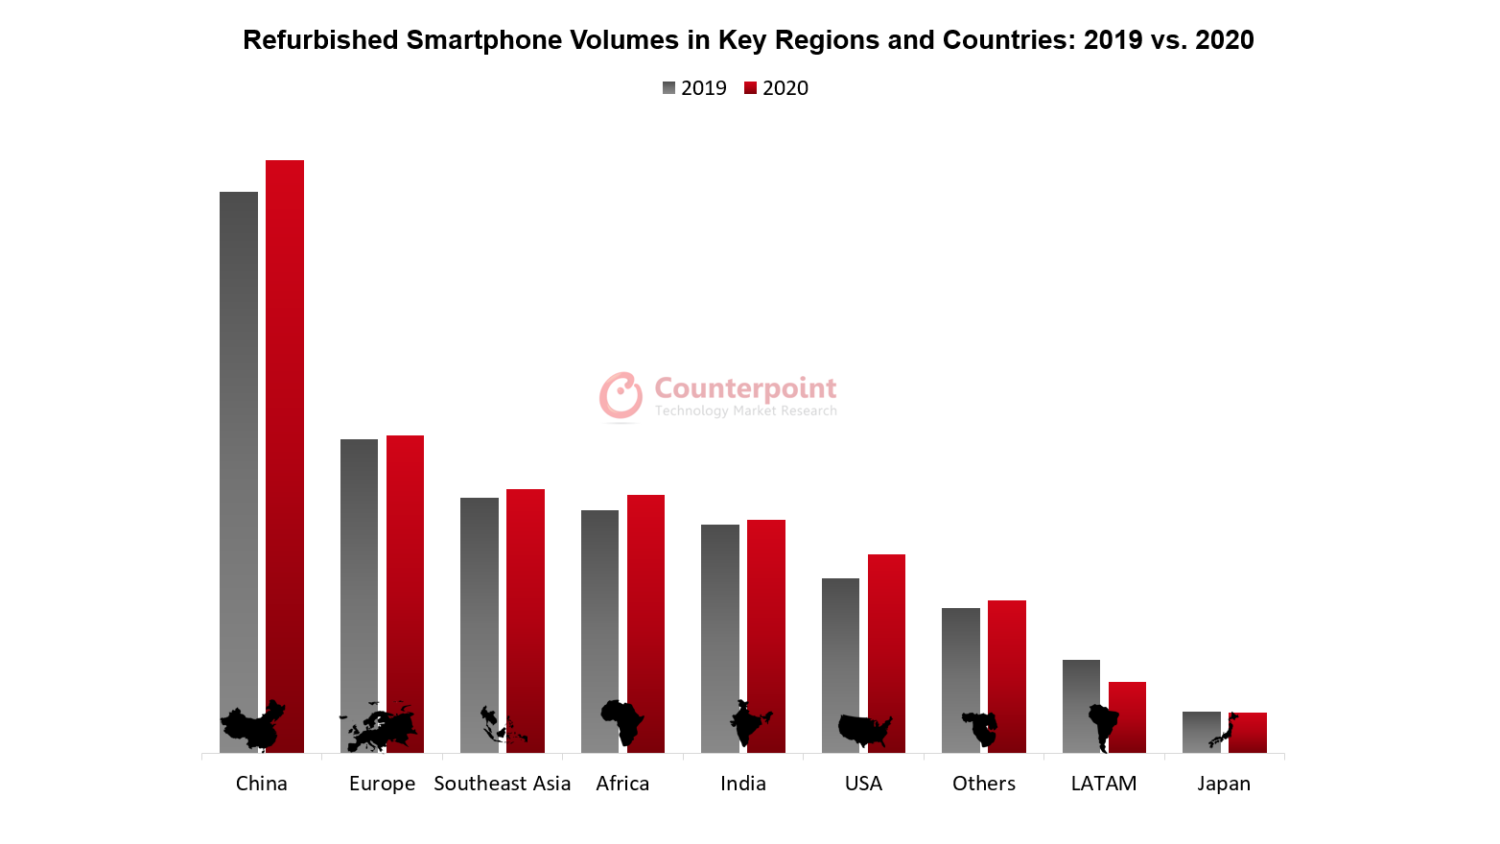 Counterpoint Research Refurbished Smartphone Volumes in Key Regions and Countries: 2019 vs. 2020